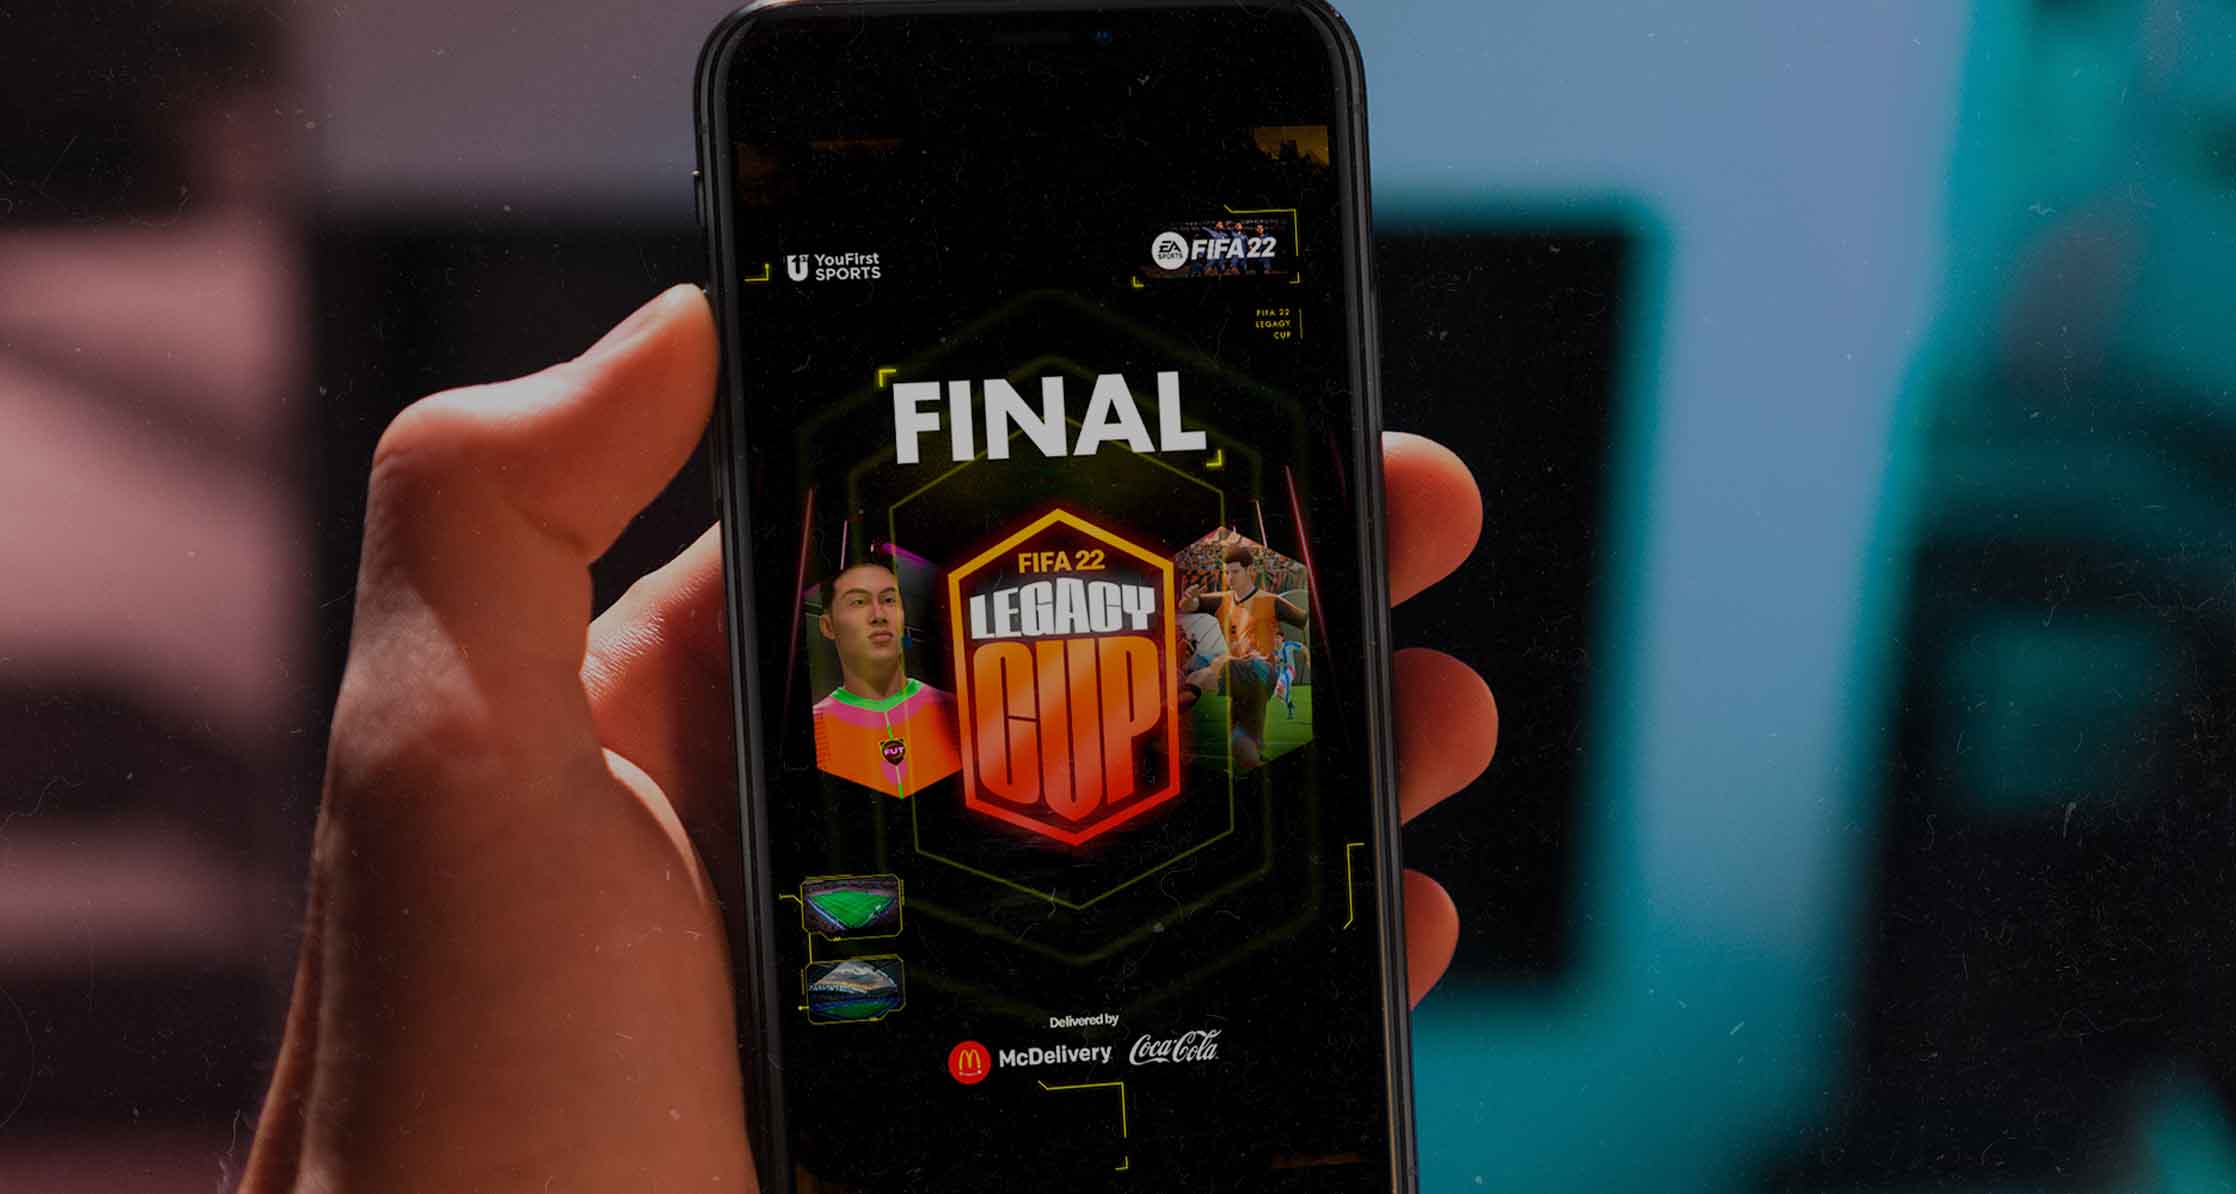 FIFA 2022 Legacy Cup Final on a mobile phone.